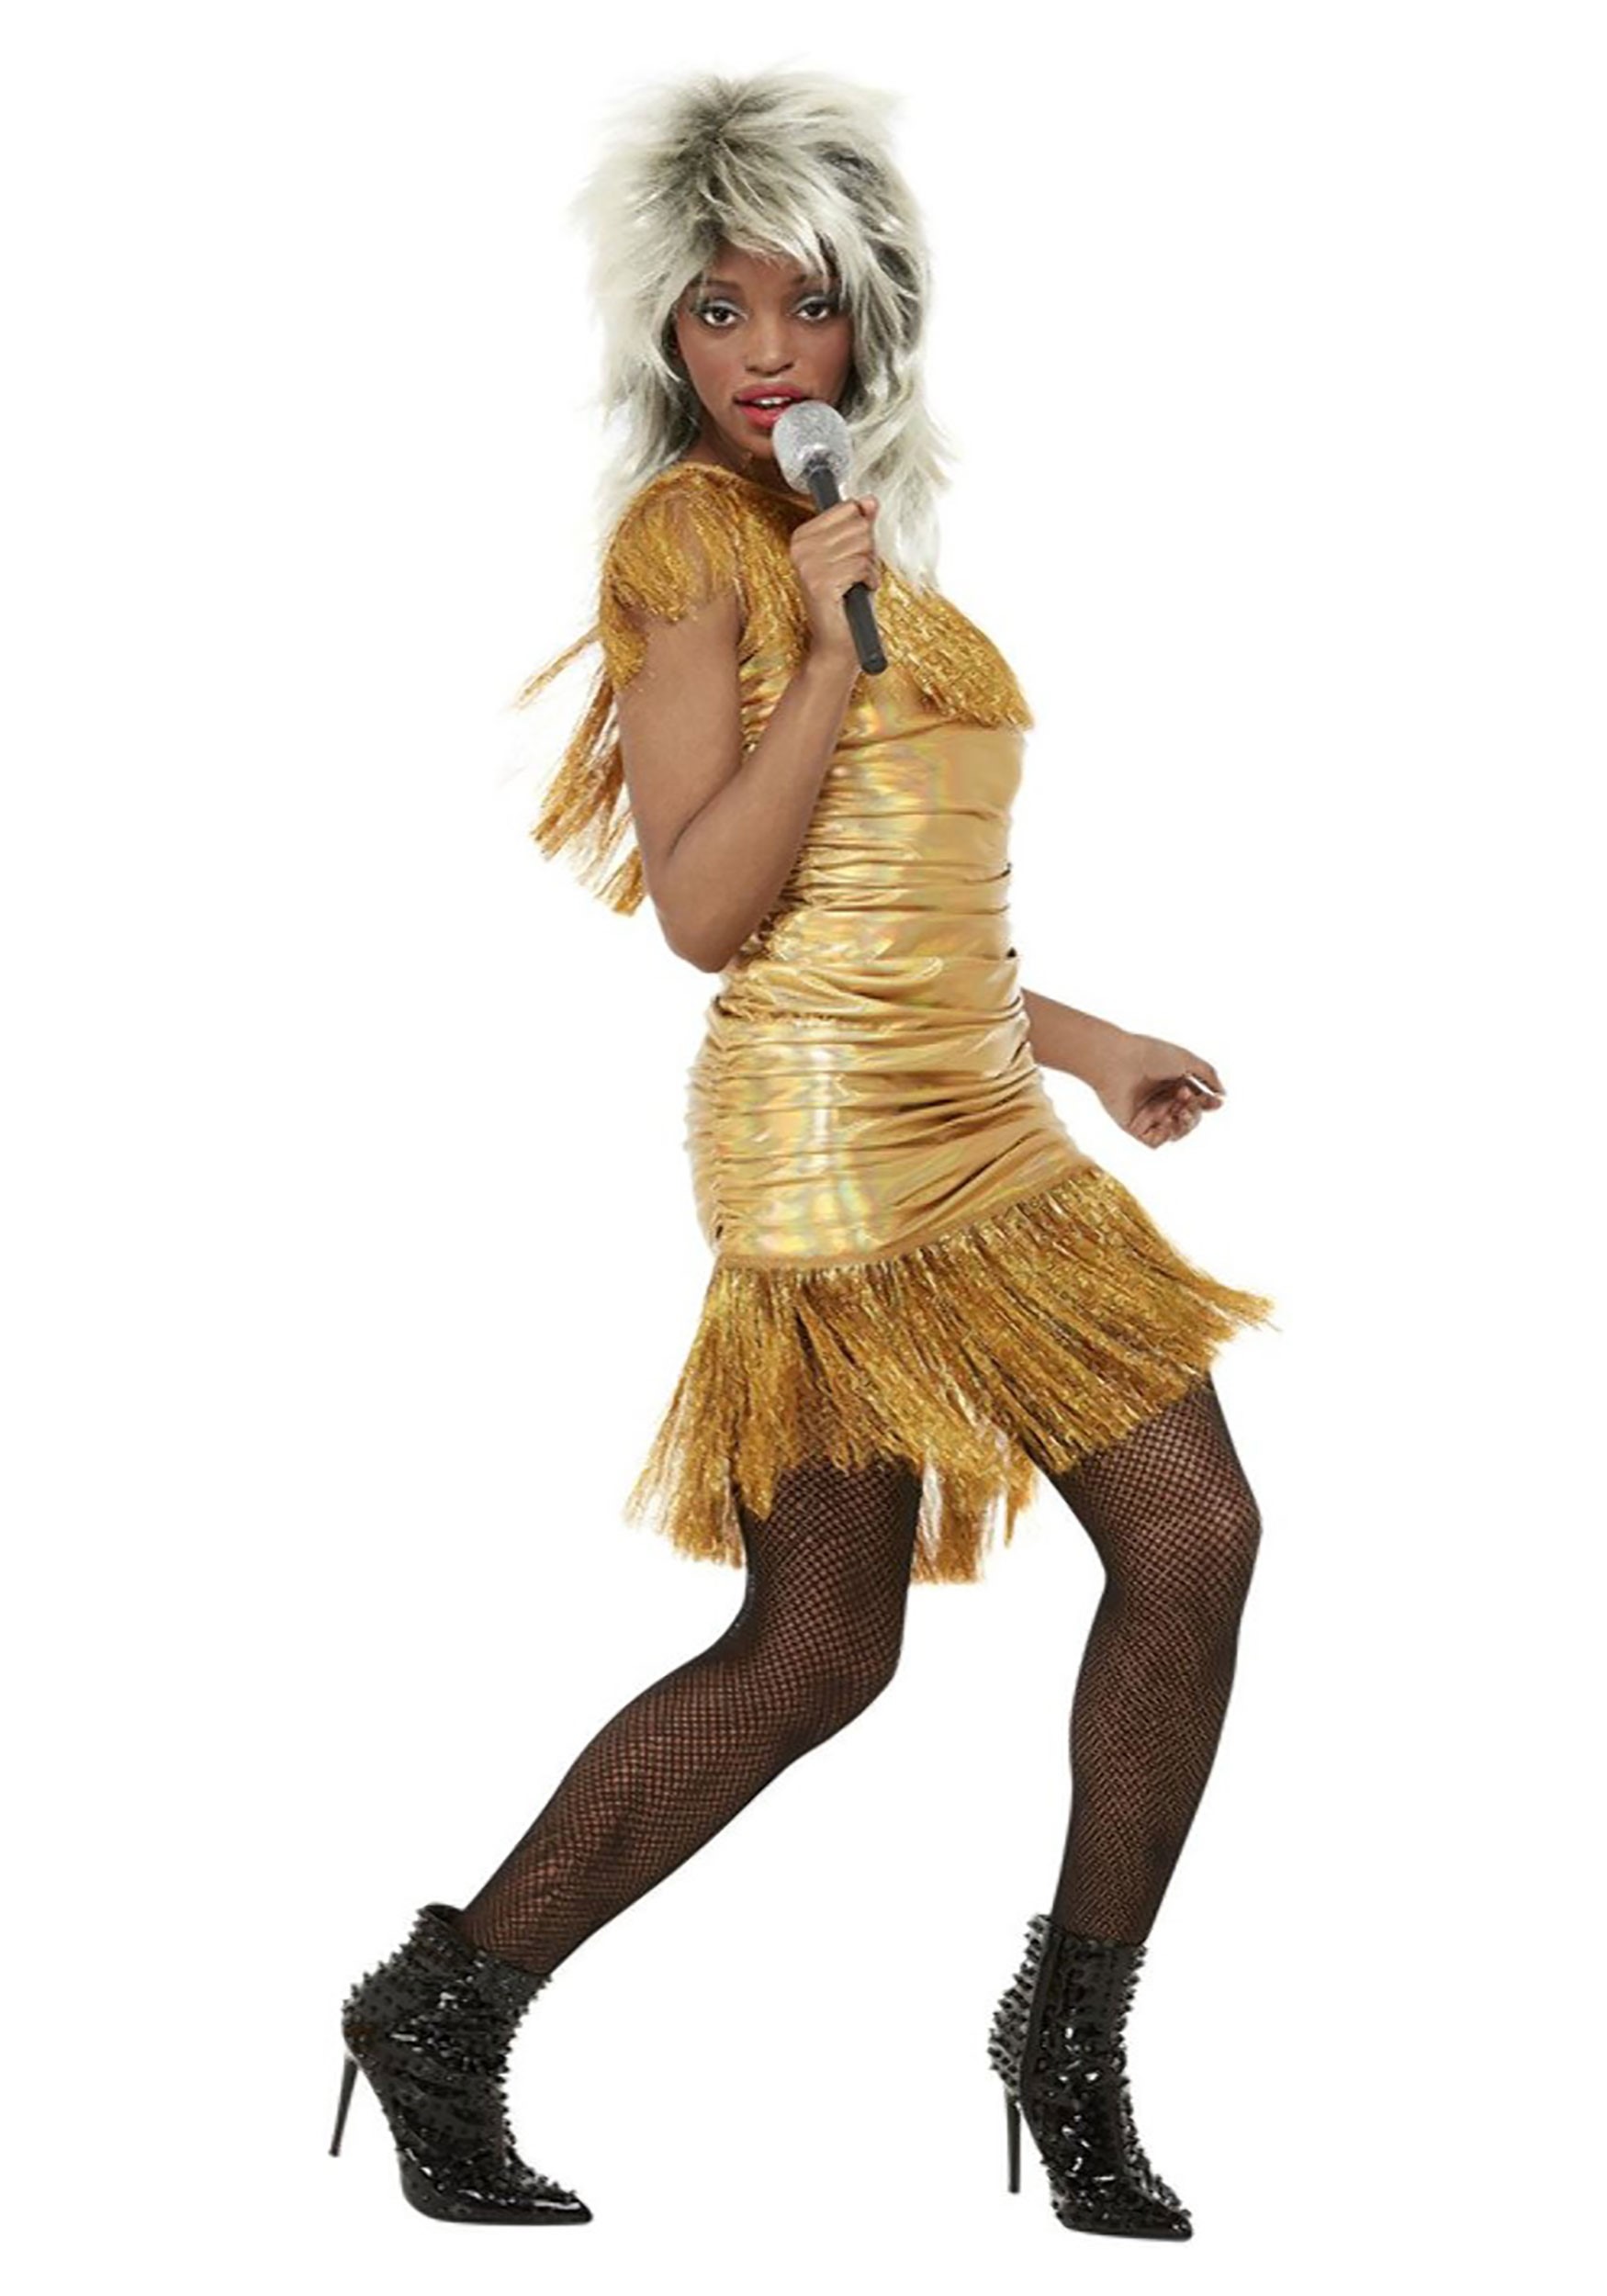 Photos - Fancy Dress SIMPLY Smiffys  The Best Tina Turner Costume for Women Beige SM70016 